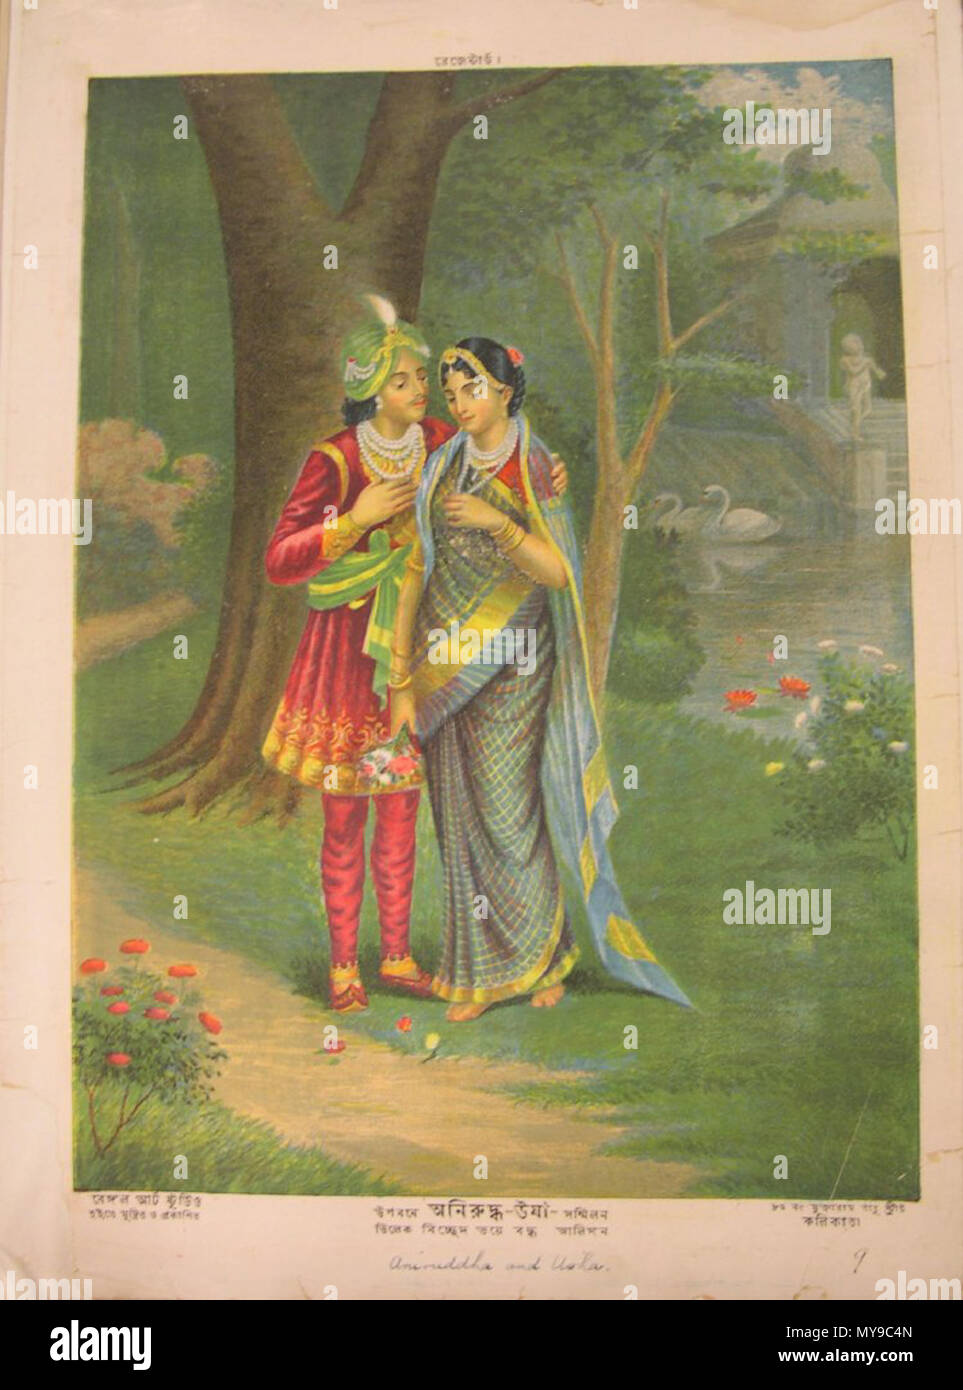 . English: Album of popular prints mounted on cloth pages. Colour lithograph, lettered, inscribed and numbered 9. Aniruddha and Usha stand in a forest with a western influenced landscape scene, complete with a pair of swans floating in a pond, in the background. Usha fell in love with a young man in a dream, and enlisted the help of an artist to draw his likeness and help her find him. That man was identified as Aniruddha, the grandson of Krishna, and the two were secretly married. circa 1895. Printed in Calcutta 41 Aniruddha and Usha stand in a forest with a western influenced landscape scene Stock Photo